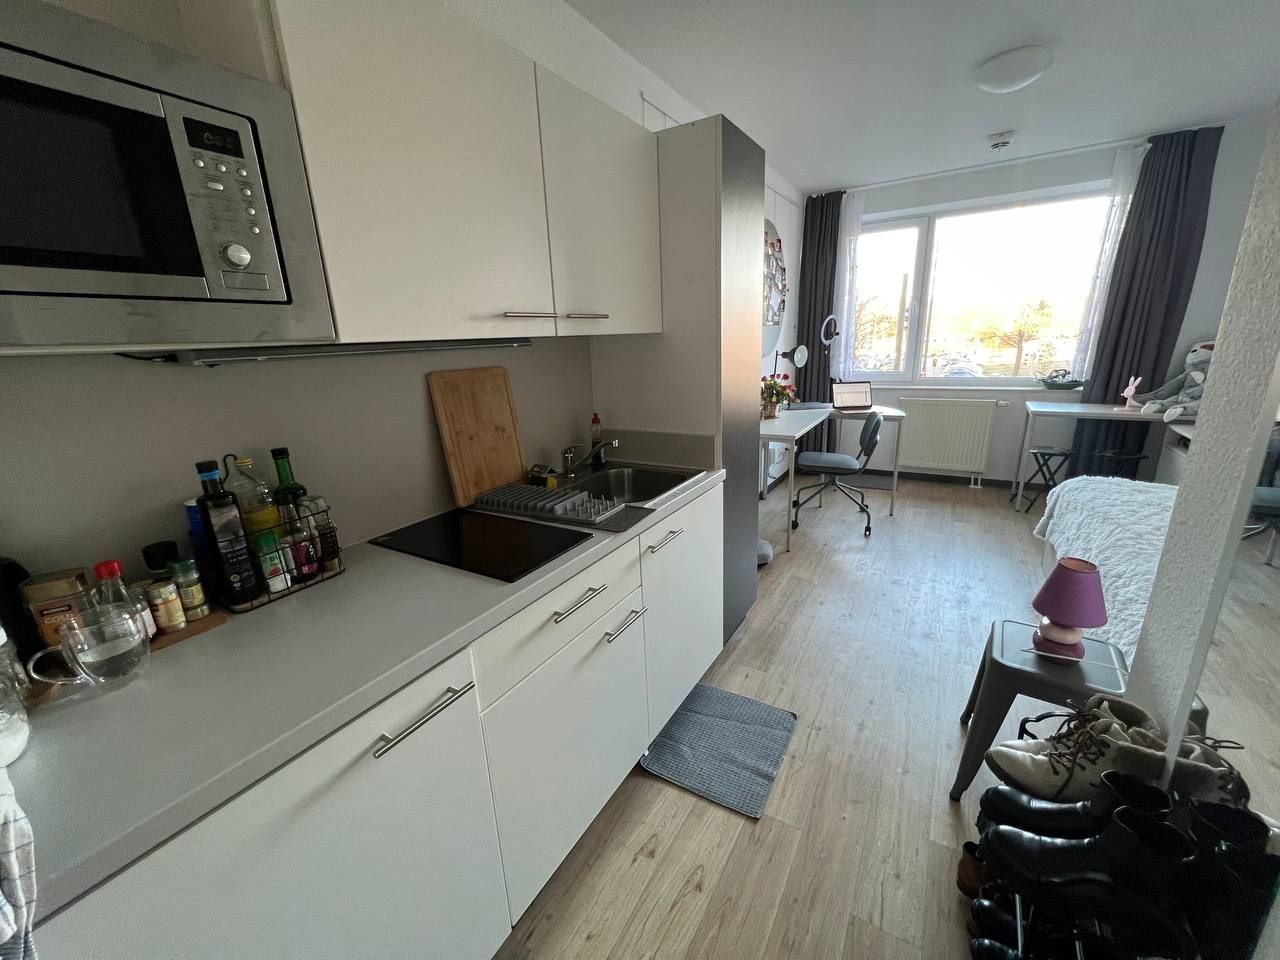 Fully furnished 1 room apartment 1 minute from the University